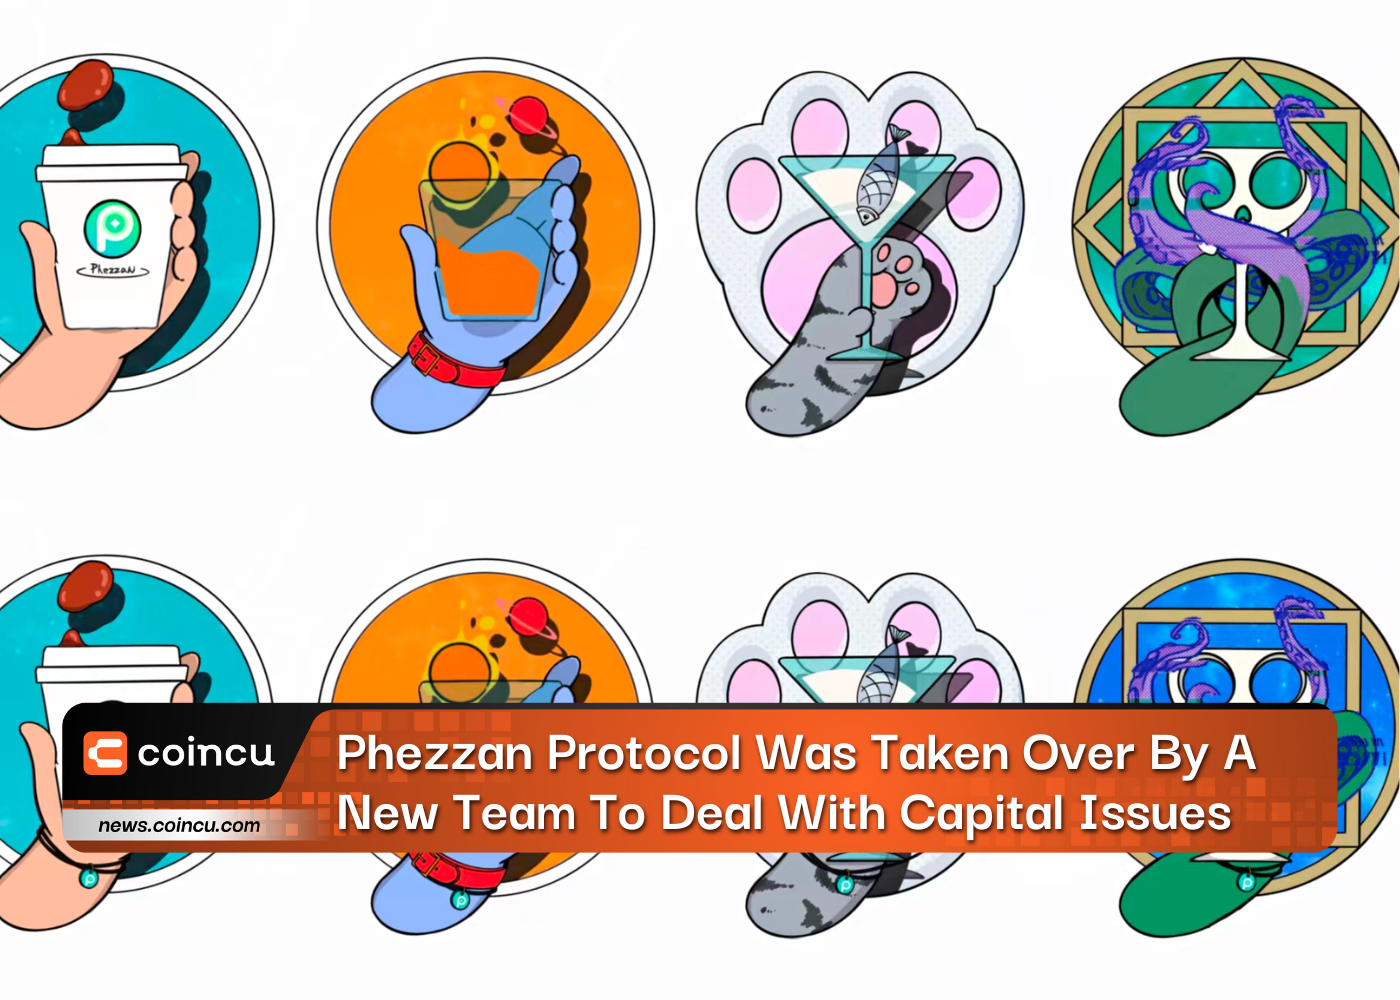 Phezzan Protocol Was Taken Over By A New Team To Deal With Capital Issues